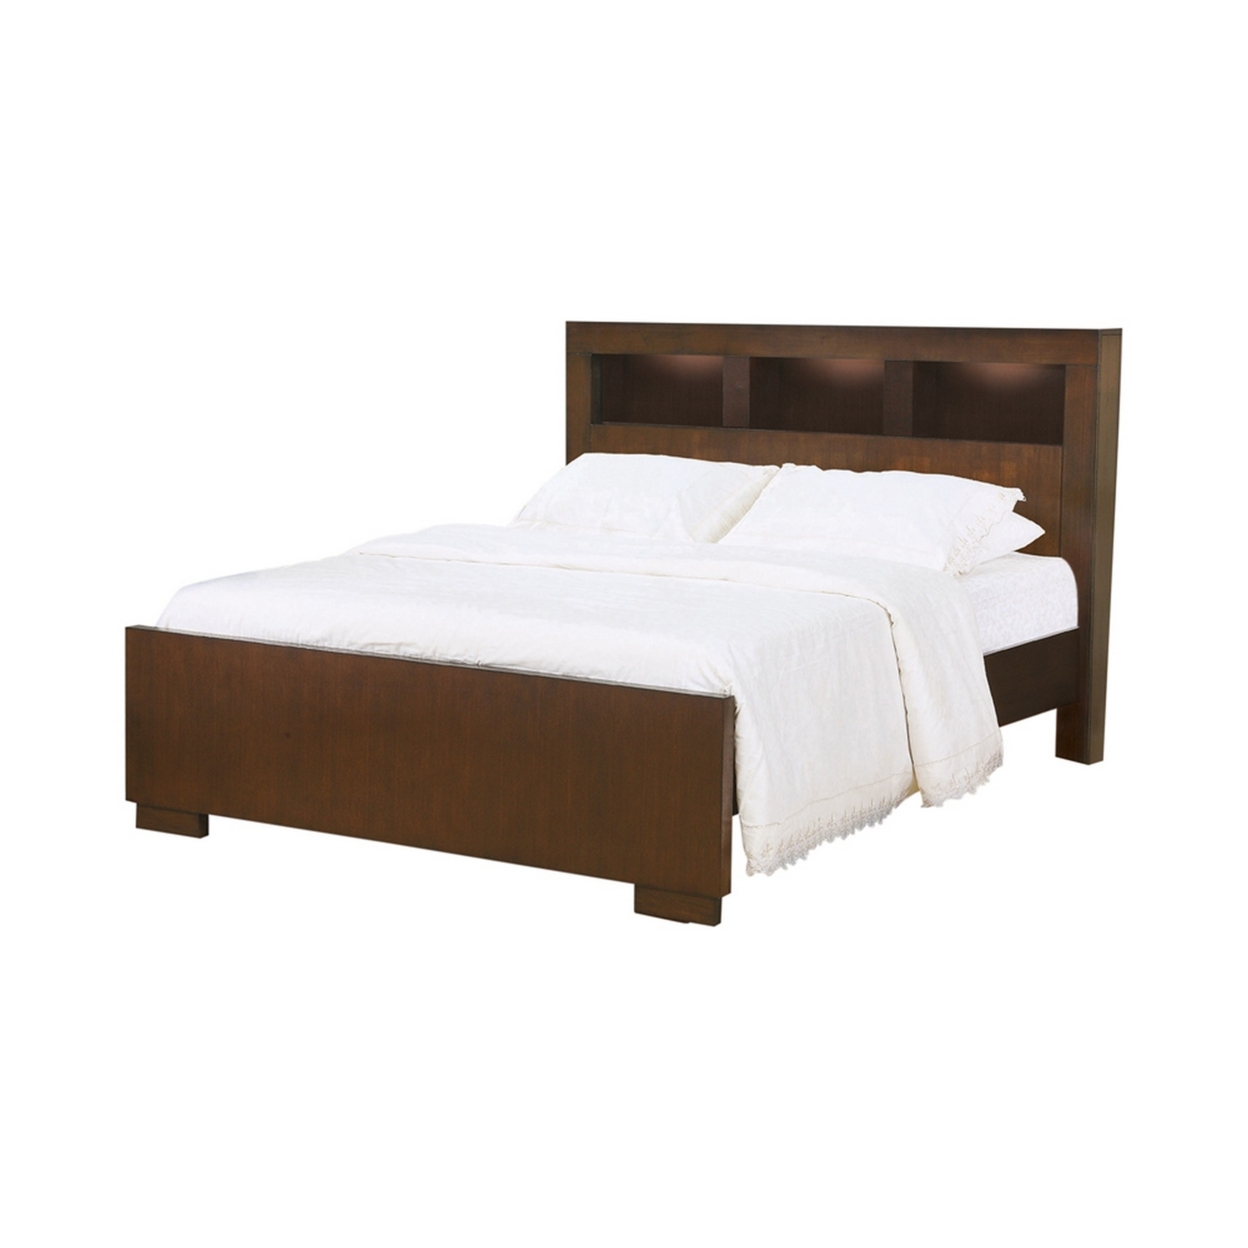 3 Open Bookcase California King Size Bed With Soft Light, Brown- Saltoro Sherpi